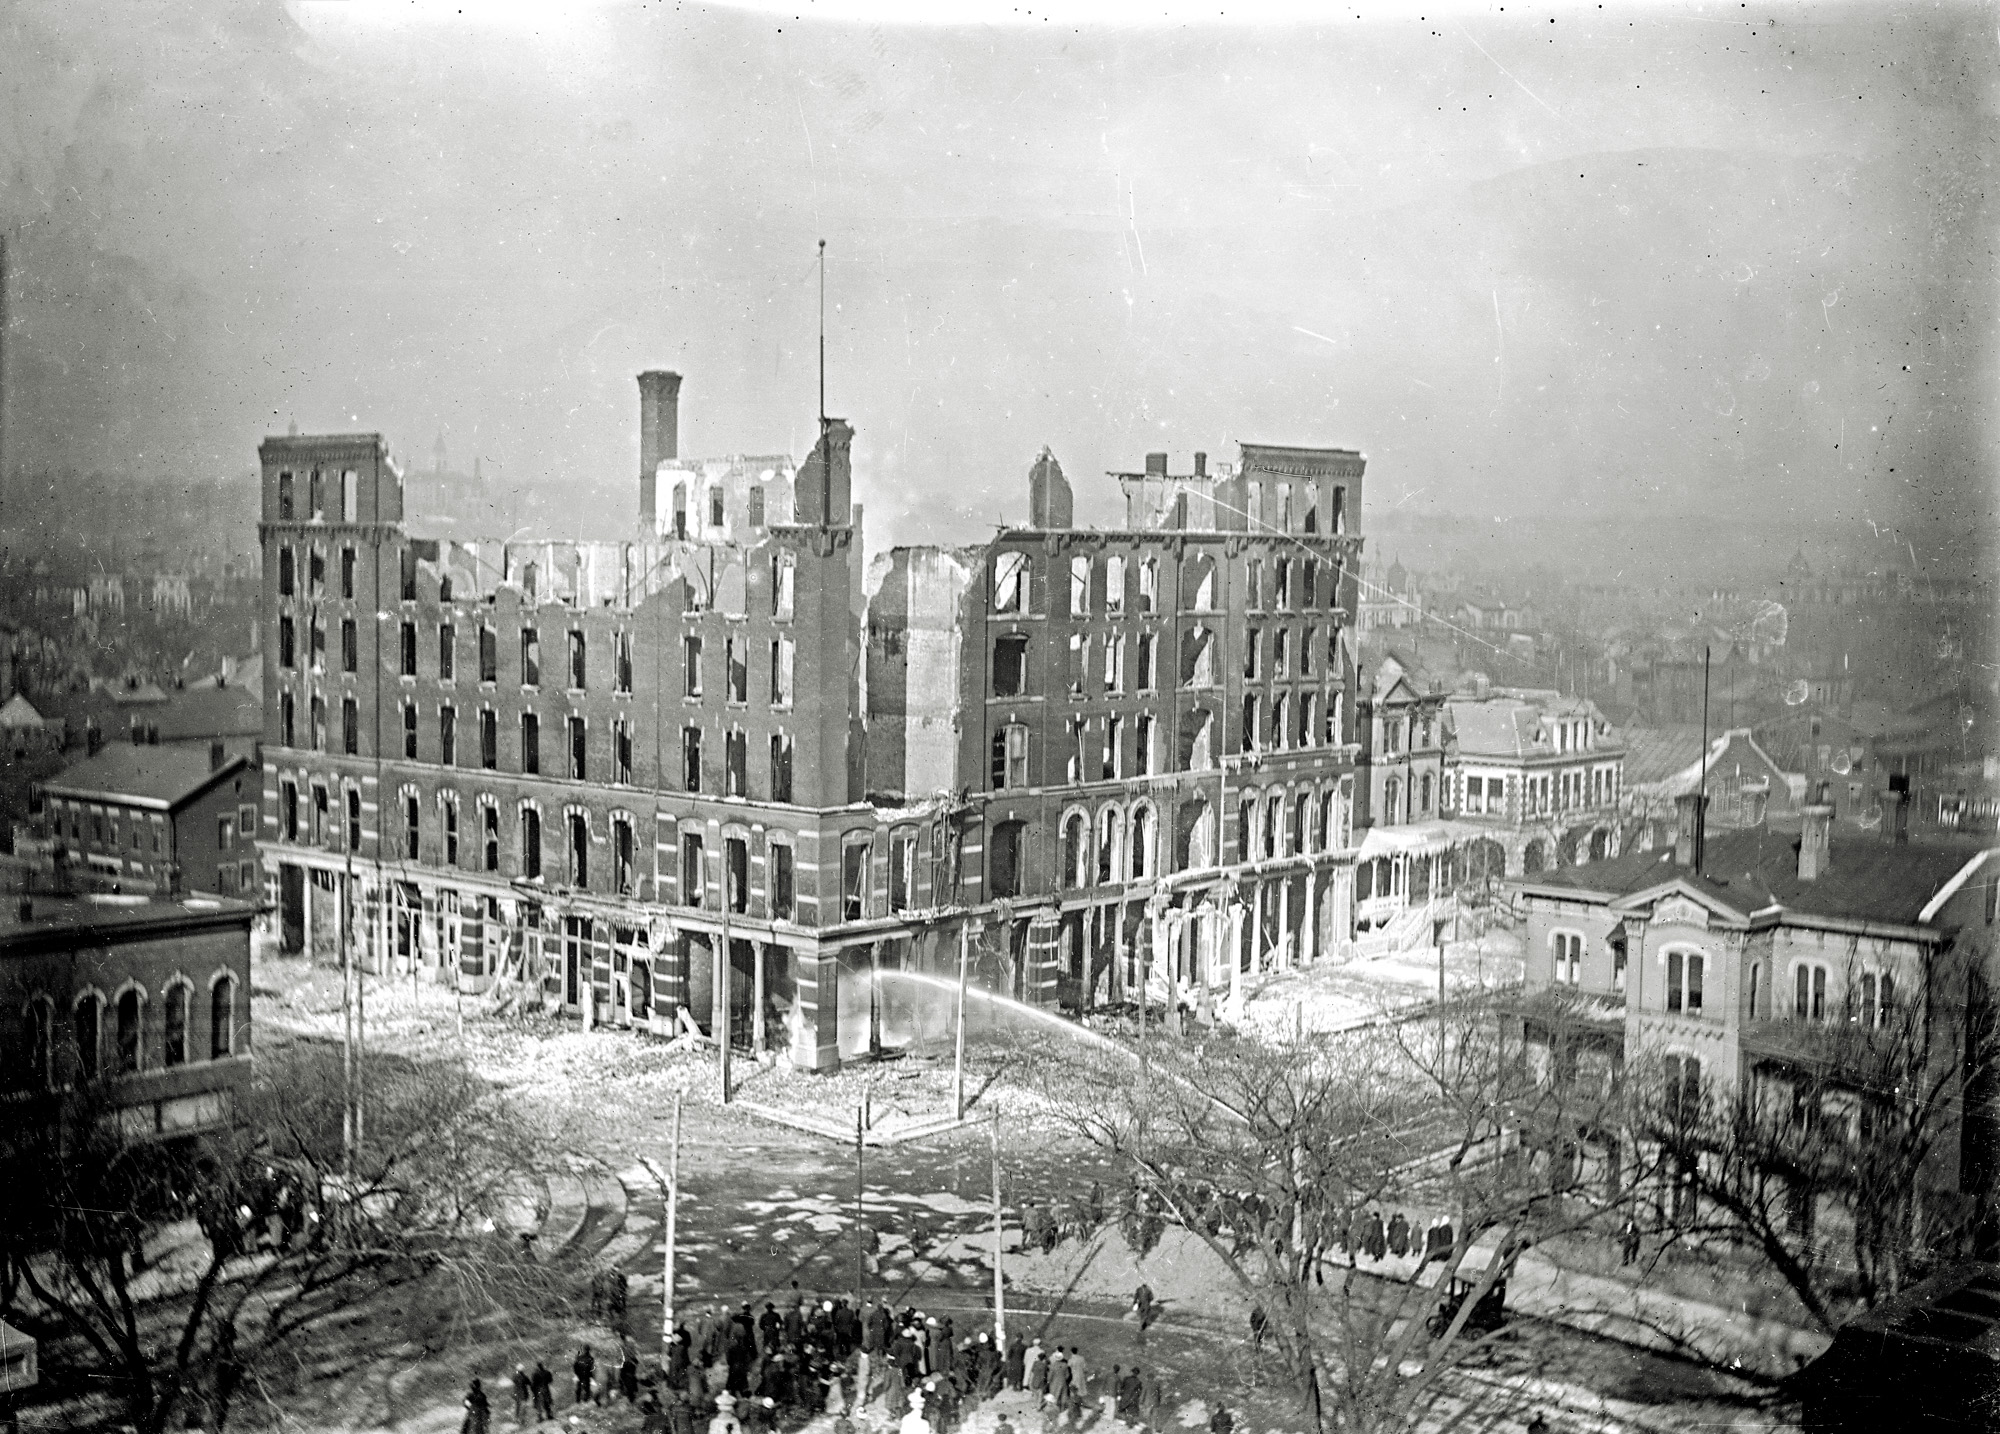 The National Hotel Fire (corner of Hamilton and Jefferson Streets), Nov. 12, 1911. Opening on October 30, 1883, the National quickly became the preeminent elegant Hotel in Peoria, until its untimely demise. Firefighter Chester Mooberry of the Peoria Fire Department died in the line of duty when he was caught beneath a falling smokestack. (Permission granted and courtesy of Peoria Historical Society Collections) View full size.